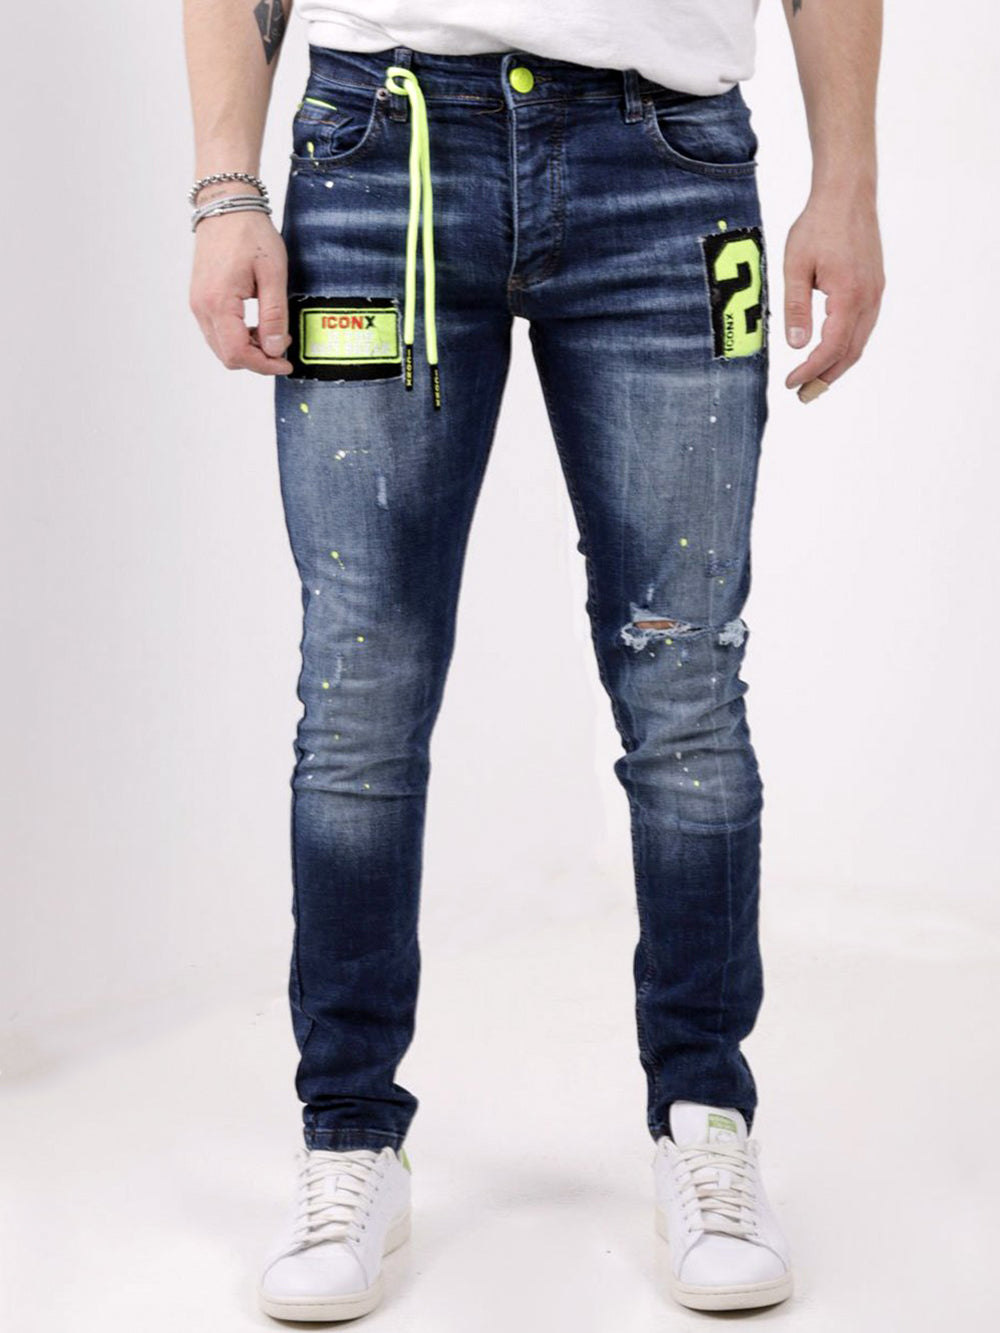 A man wearing a pair of PHOSPHORUS jeans with patches on them.